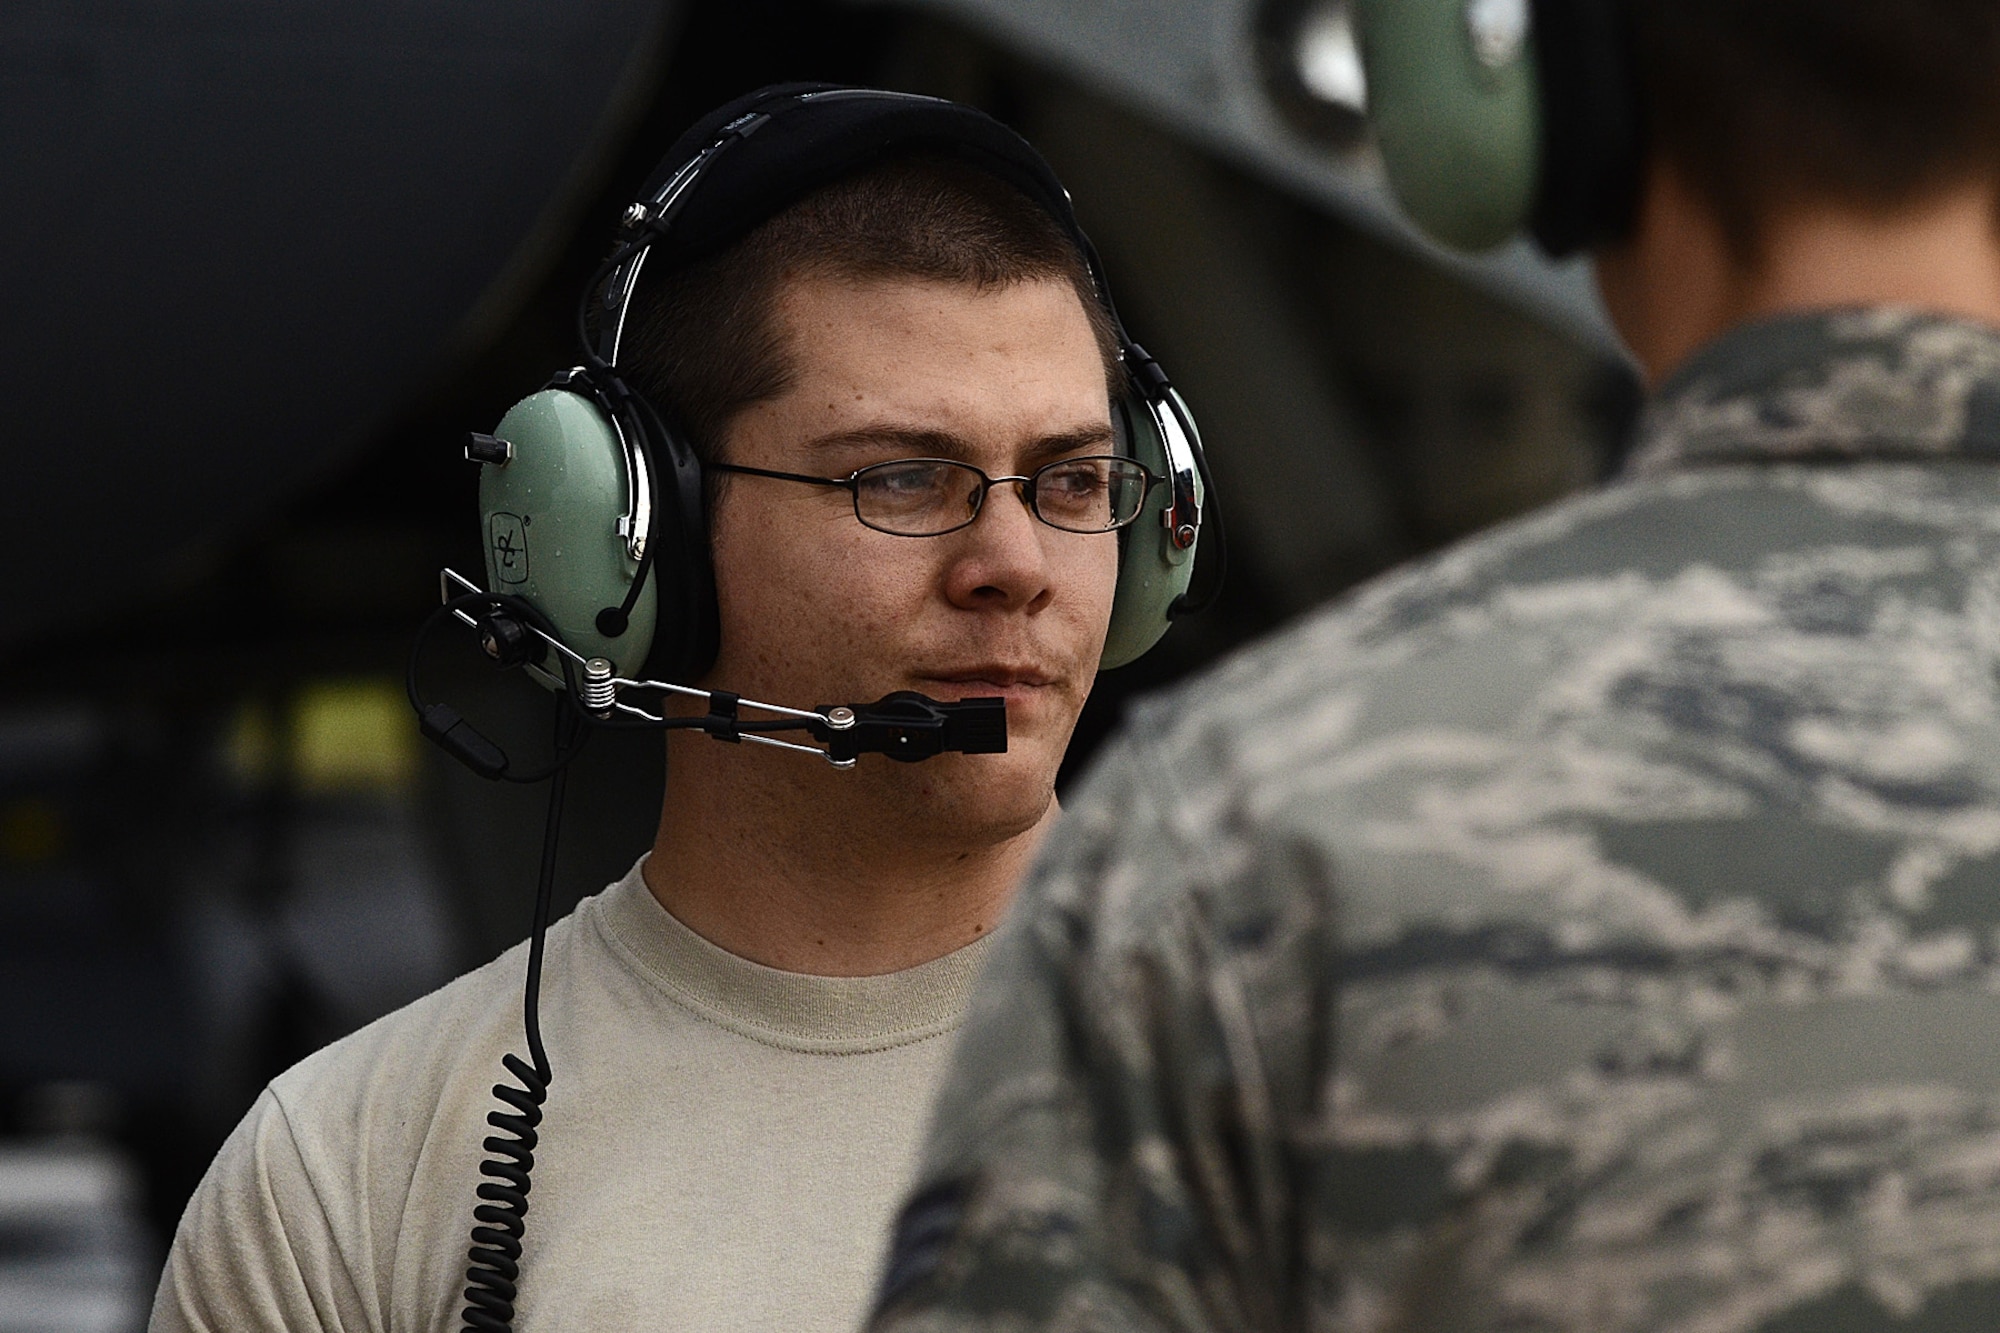 Staff Sgt. Stephen Cole, a U.S. Air Force B-52 Stratofortress crew chief assigned to the 20th Expeditionary Aircraft Maintenance Squadron, talks to his wingmen during preflight operations Aug. 22, 2015, at Andersen Air Force Base, Guam.  Bomber crews with the 20th Expeditionary Bomb Squadron from Barksdale Air Force Base, Louisiana, are part of U.S. Pacific Command’s continuous bomber presence and support ongoing operations in the Indo-Asia-Pacific region. (U.S. Air Force photo by Staff Sgt. Alexander W. Riedel/Released)